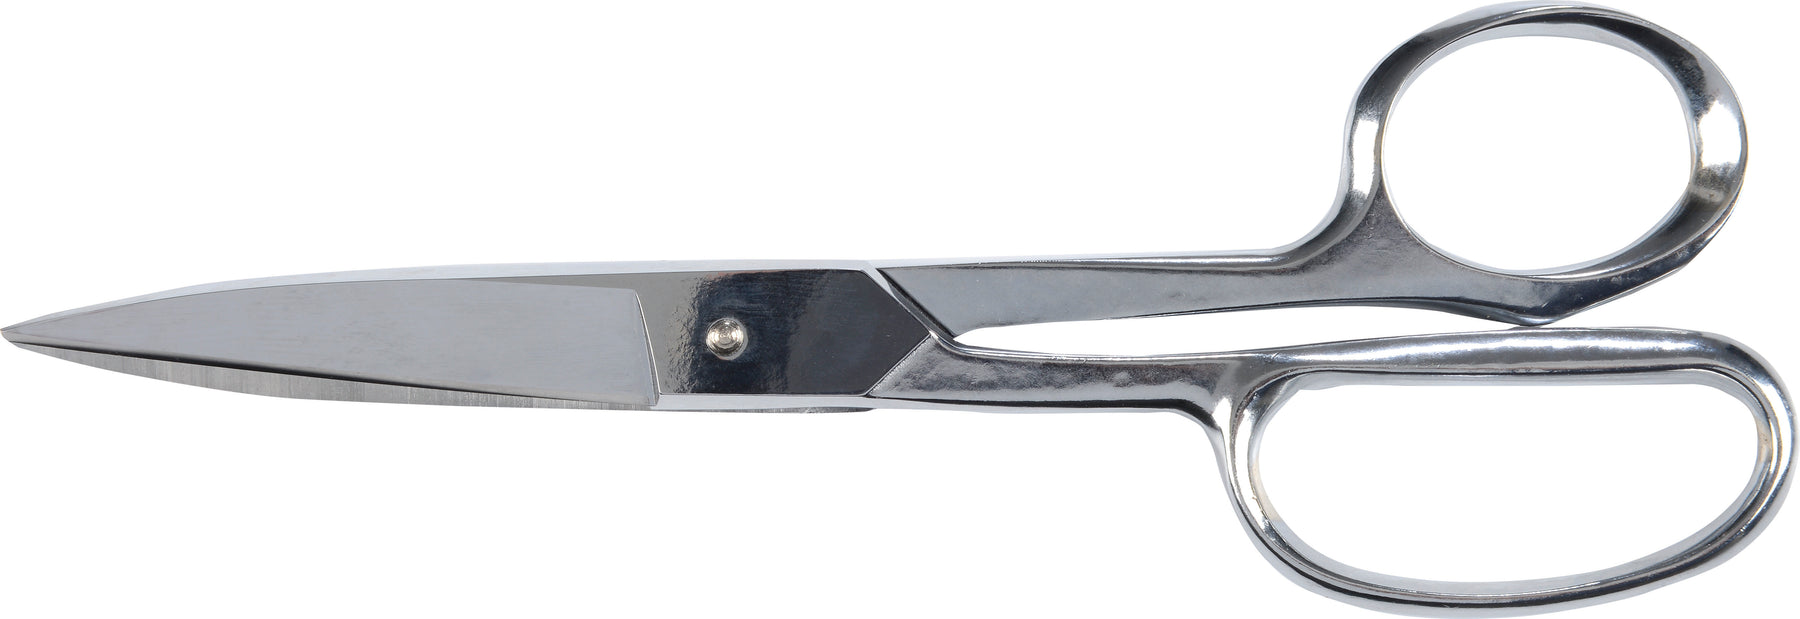 Wolff® 8 1/2" All Metal True left-handed Straight High Leverage Shear